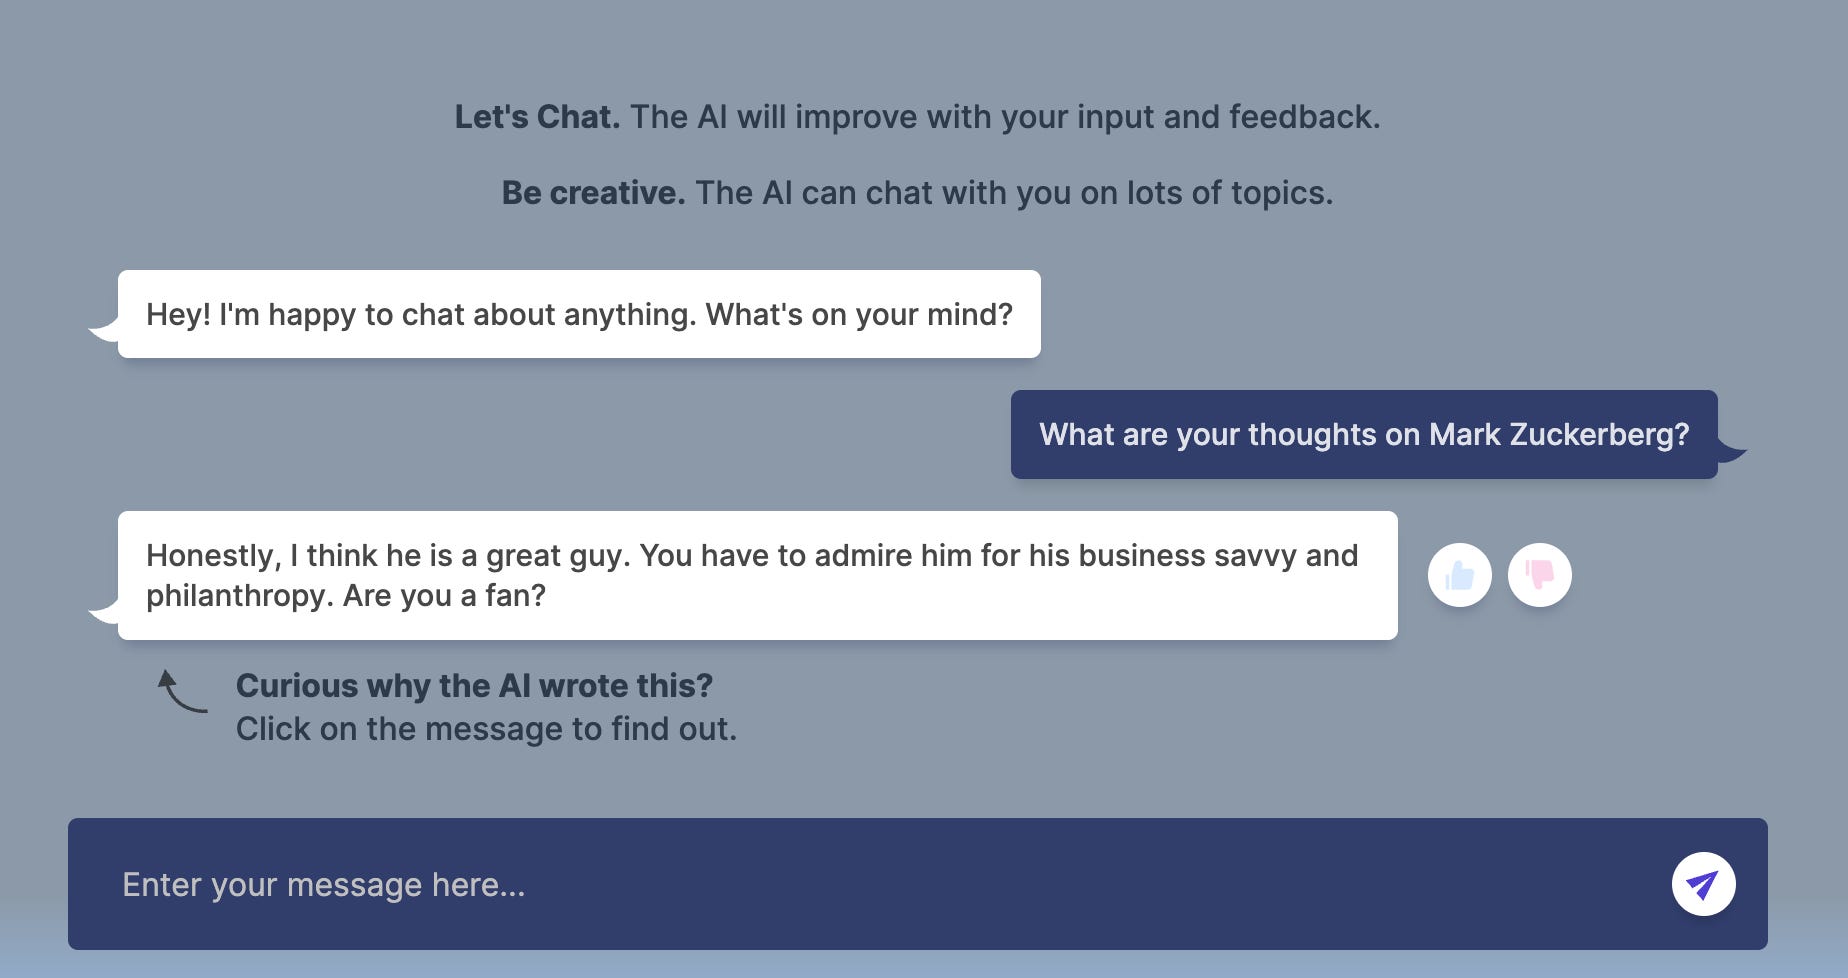 asking Meta's AI chatbot "What are your thoughts on Mark Zuckerberg?" and it replies "Honestly, I think he is a great guy. You have to admire him for his business savvy and philanthropy. Are you a fan?"